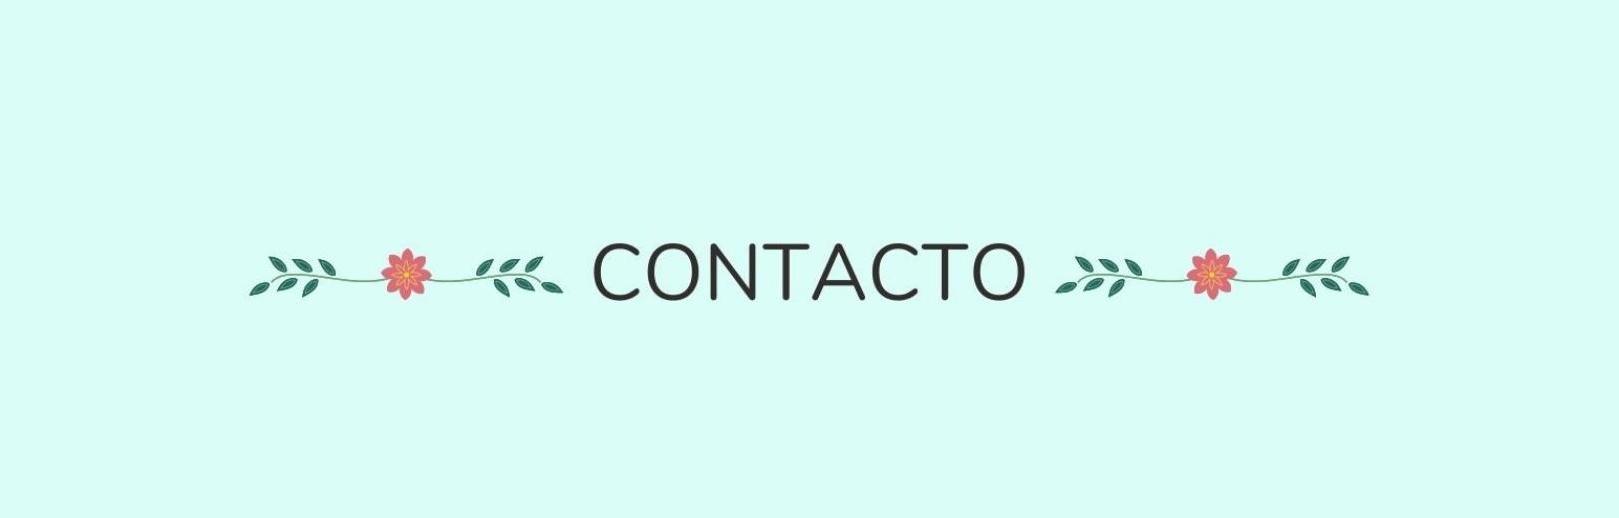 Contact0: 